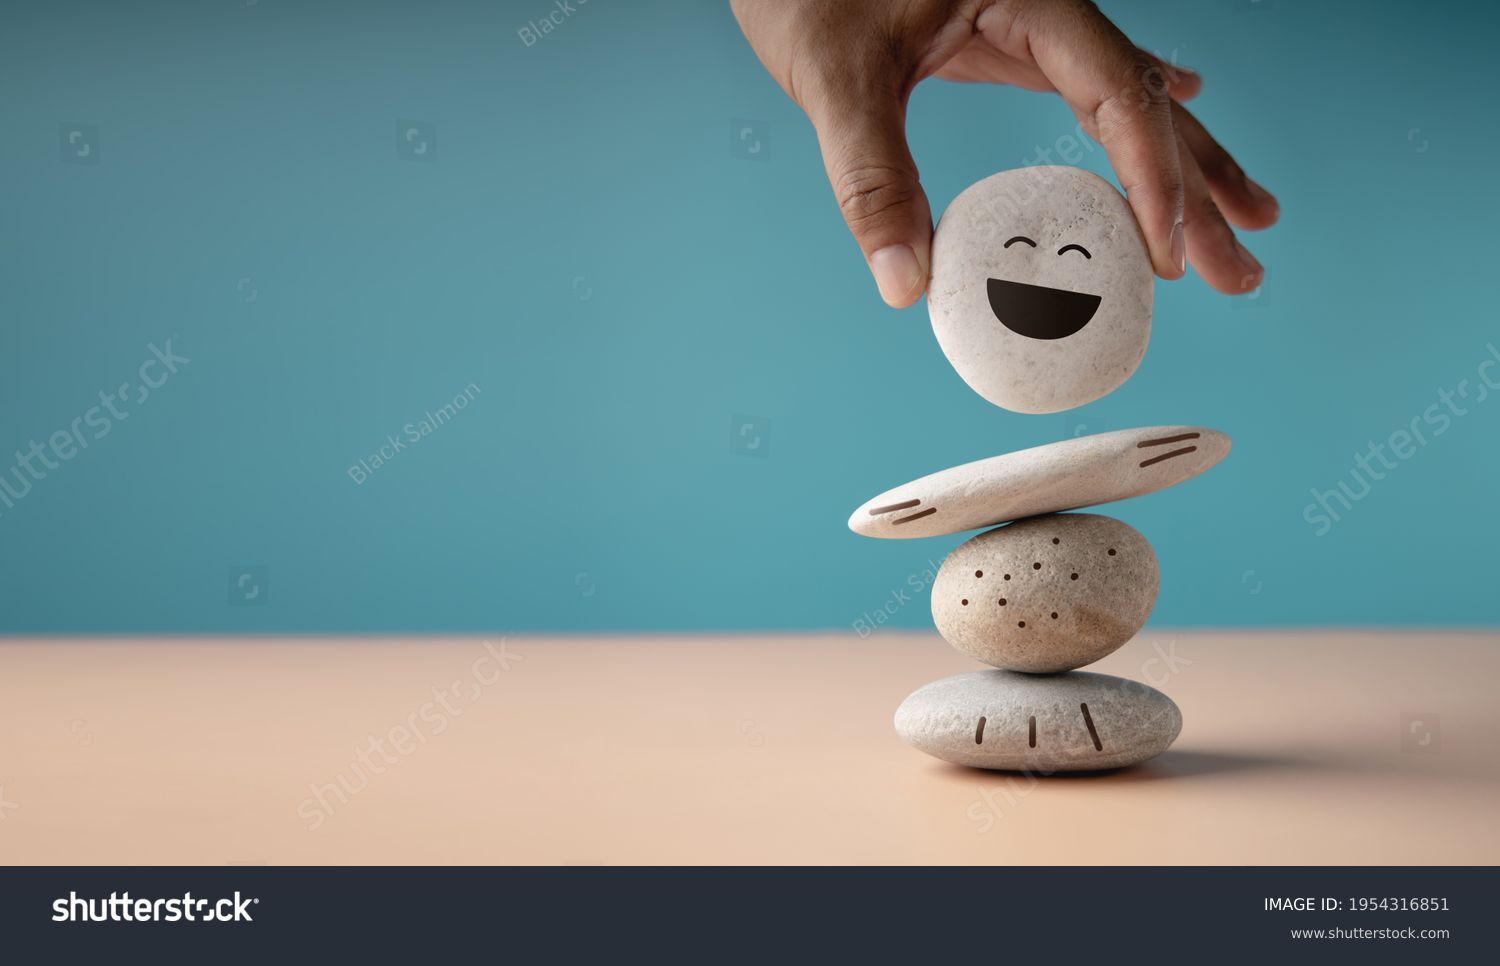 Enjoying Life Concept. Harmony and Positive Mind. Hand Setting White Natural Stone Stack to Balance. Balancing Body, Mind, Soul and Spirit. Mental Health Practice #1954316851